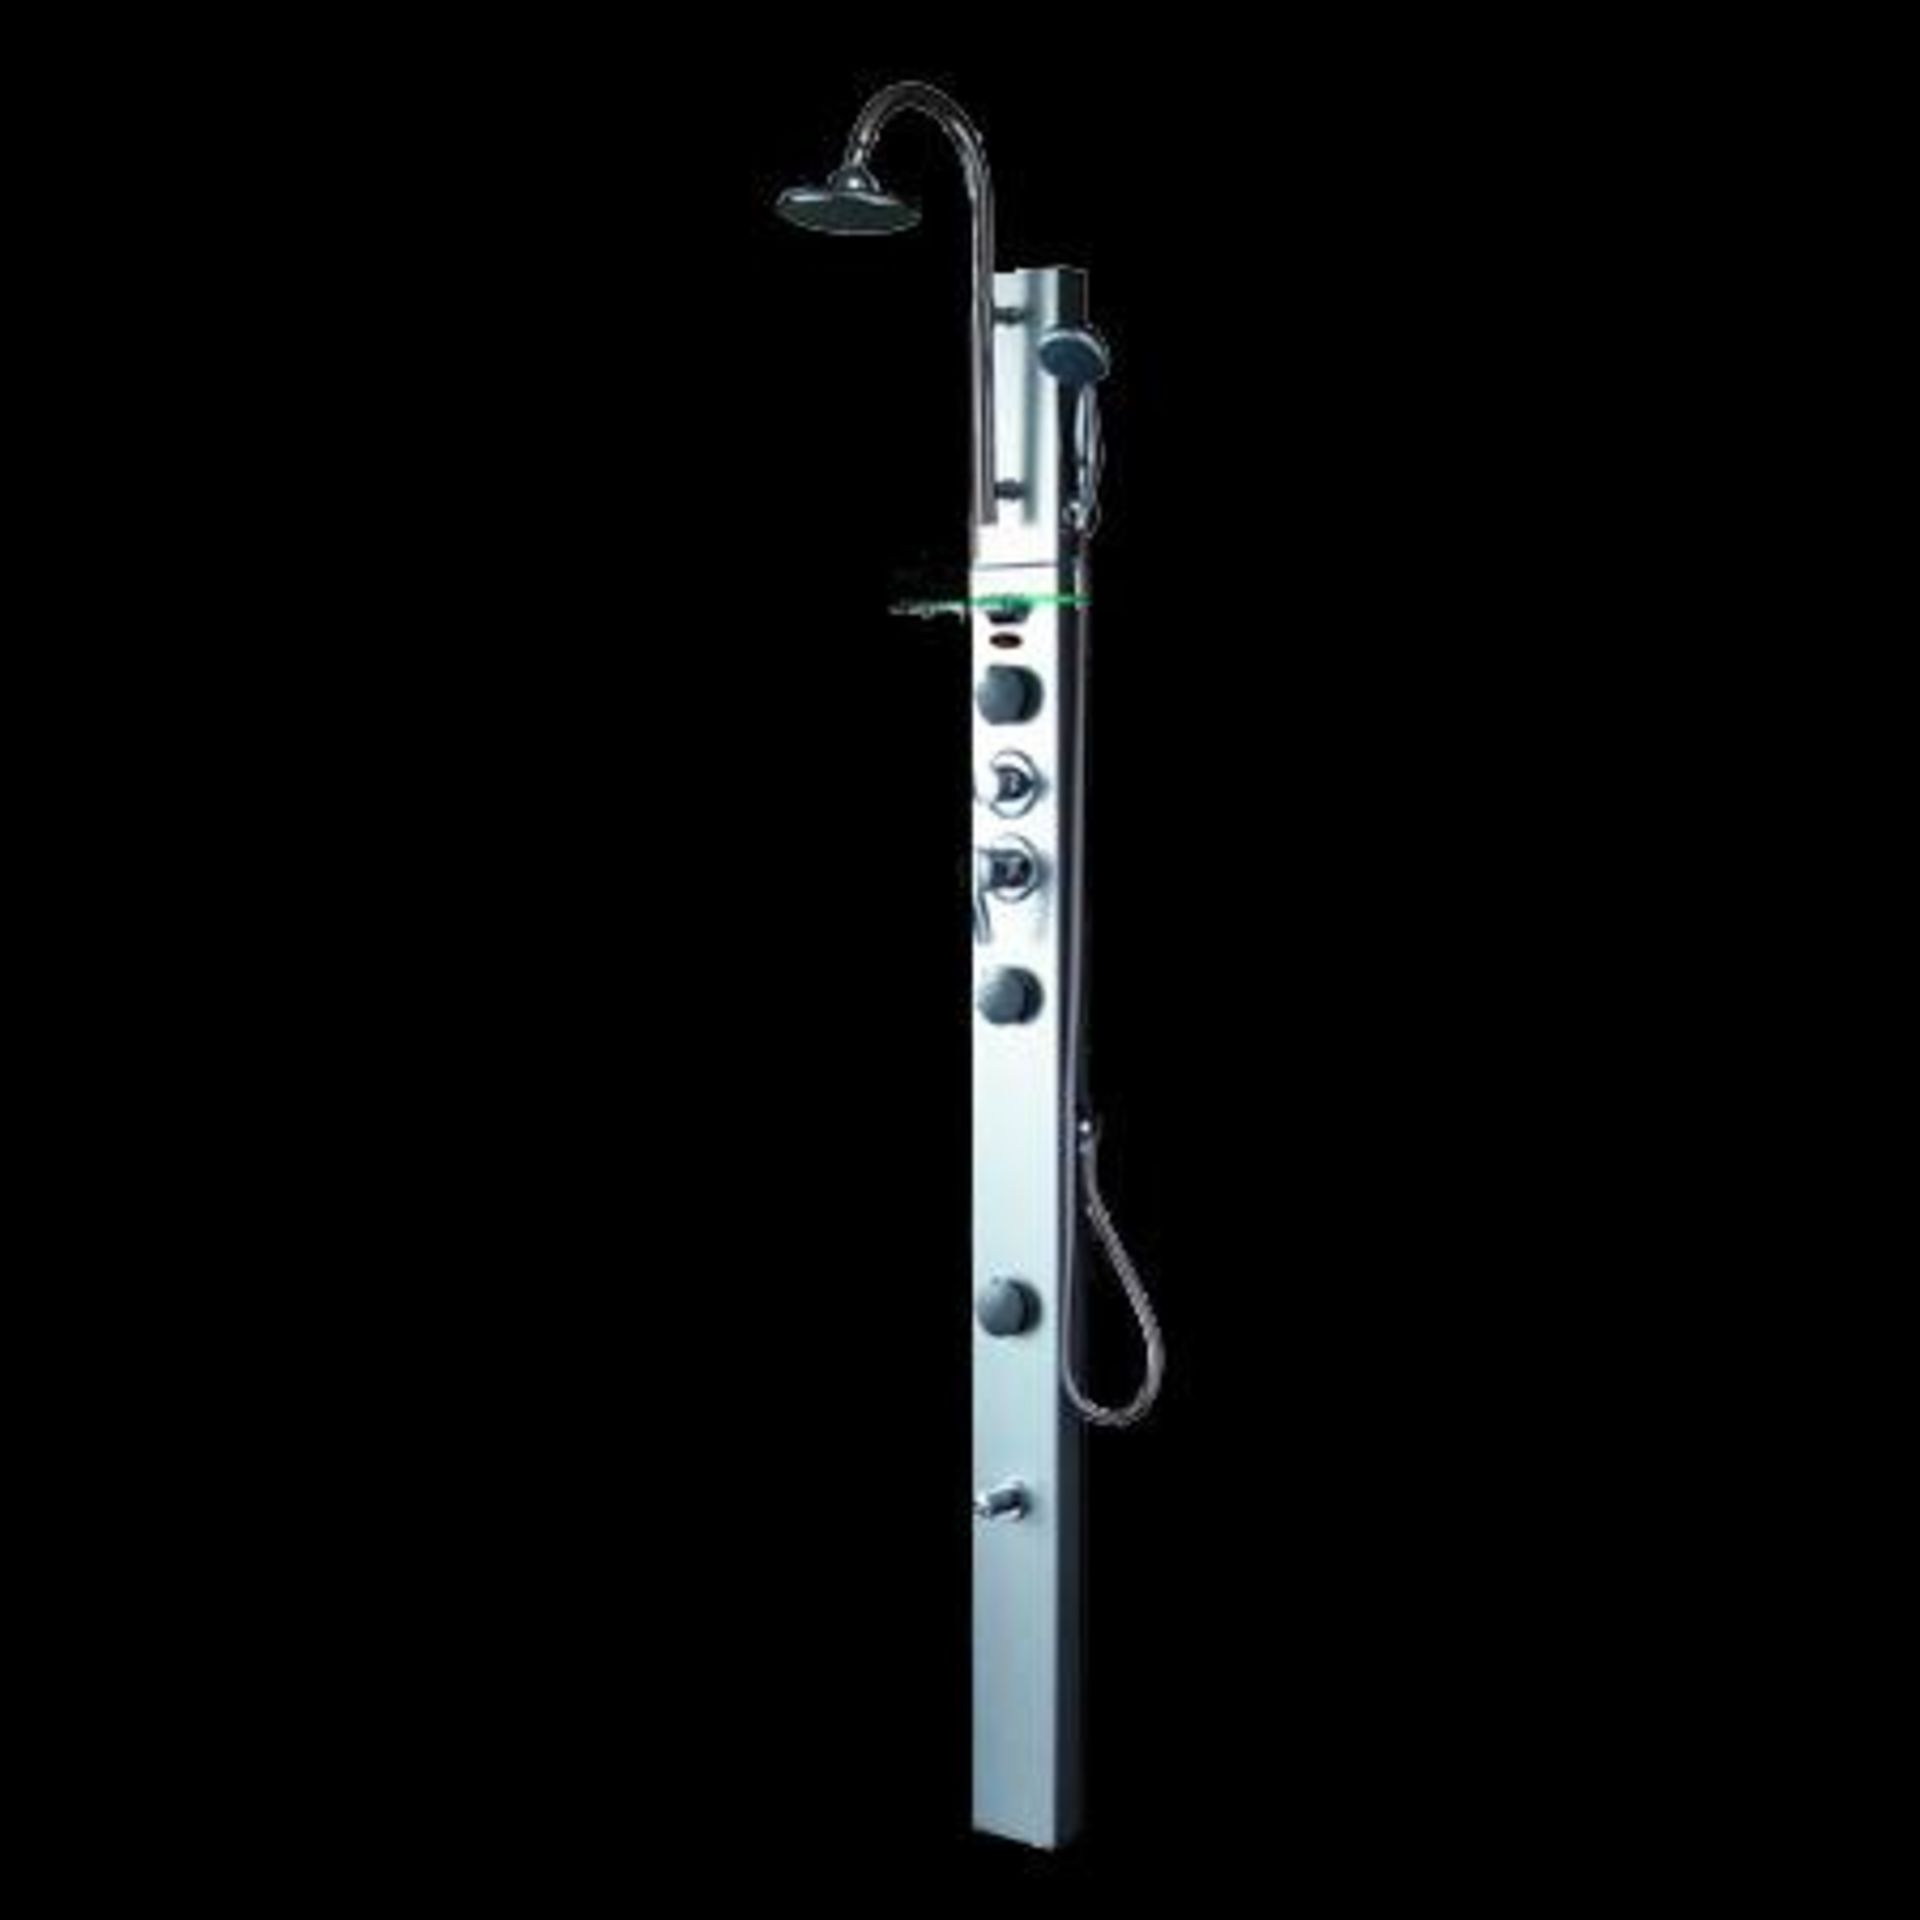 ADP 17 2000mm x 140mm corner or mid wall shower panel, aluminium, rubber tipped overhead drencher,